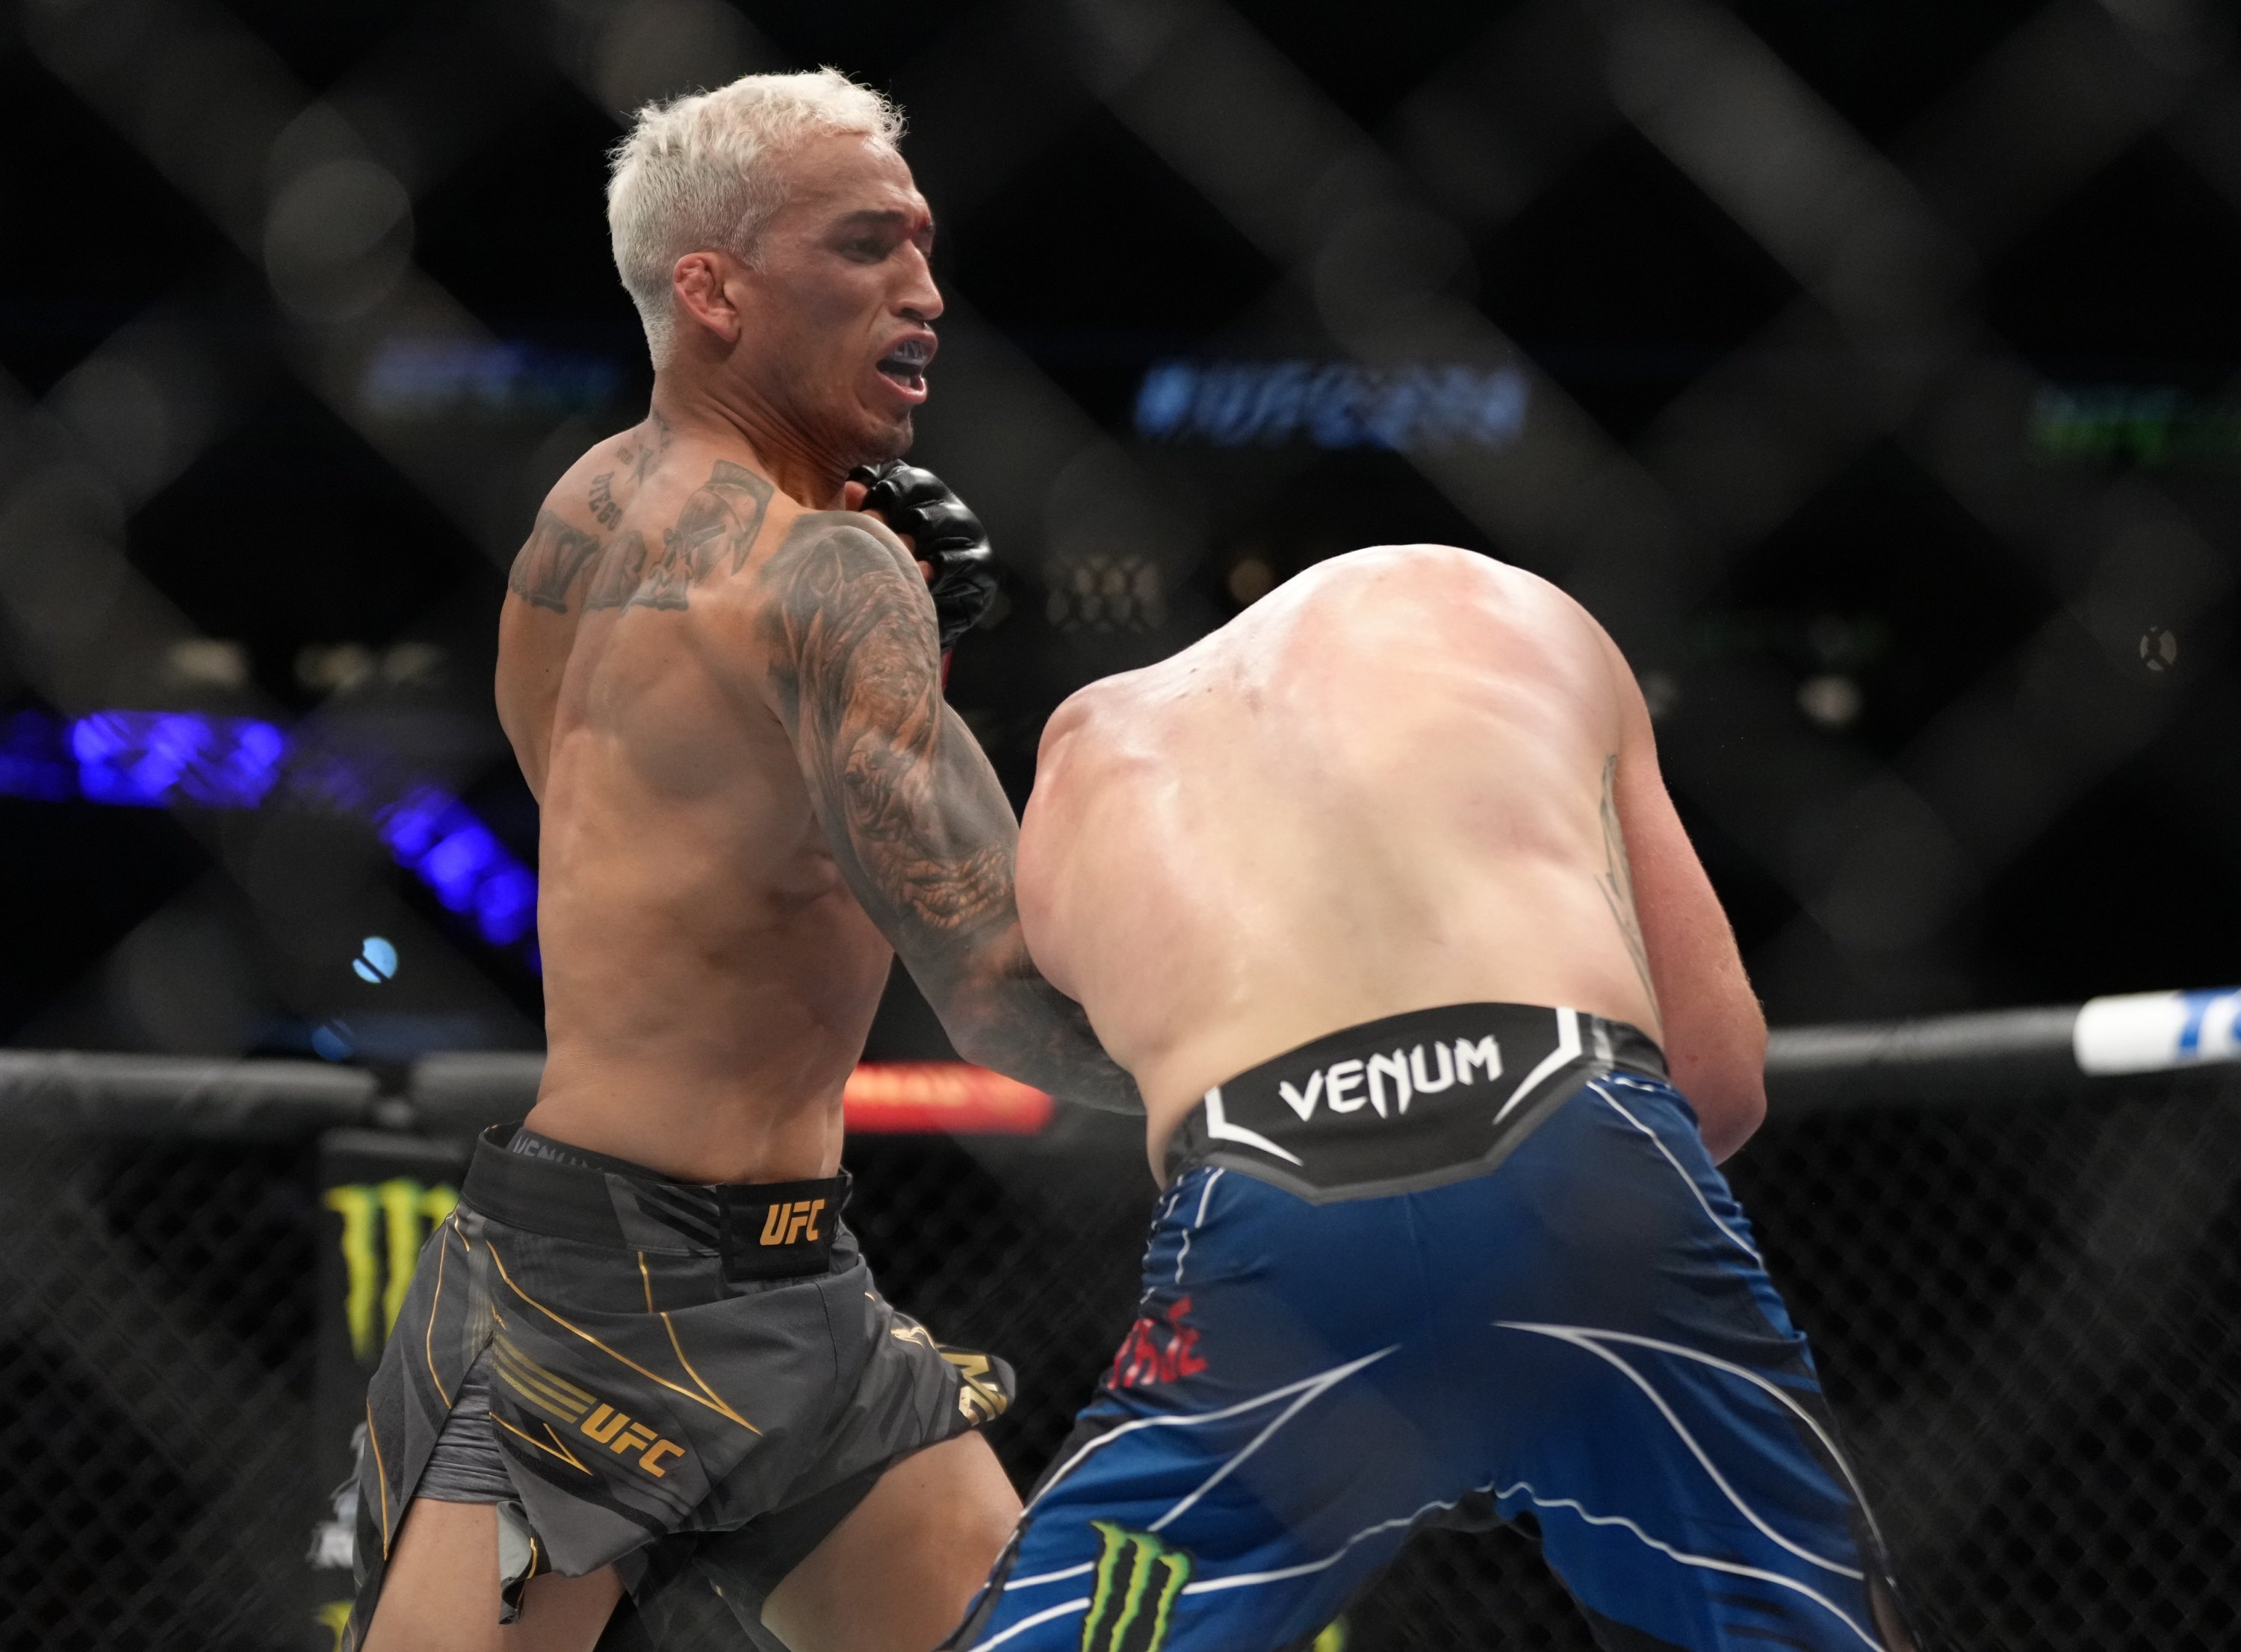 Brazil S Oliveira Seeks To Reclaim Lightweight Crown At Ufc Daily